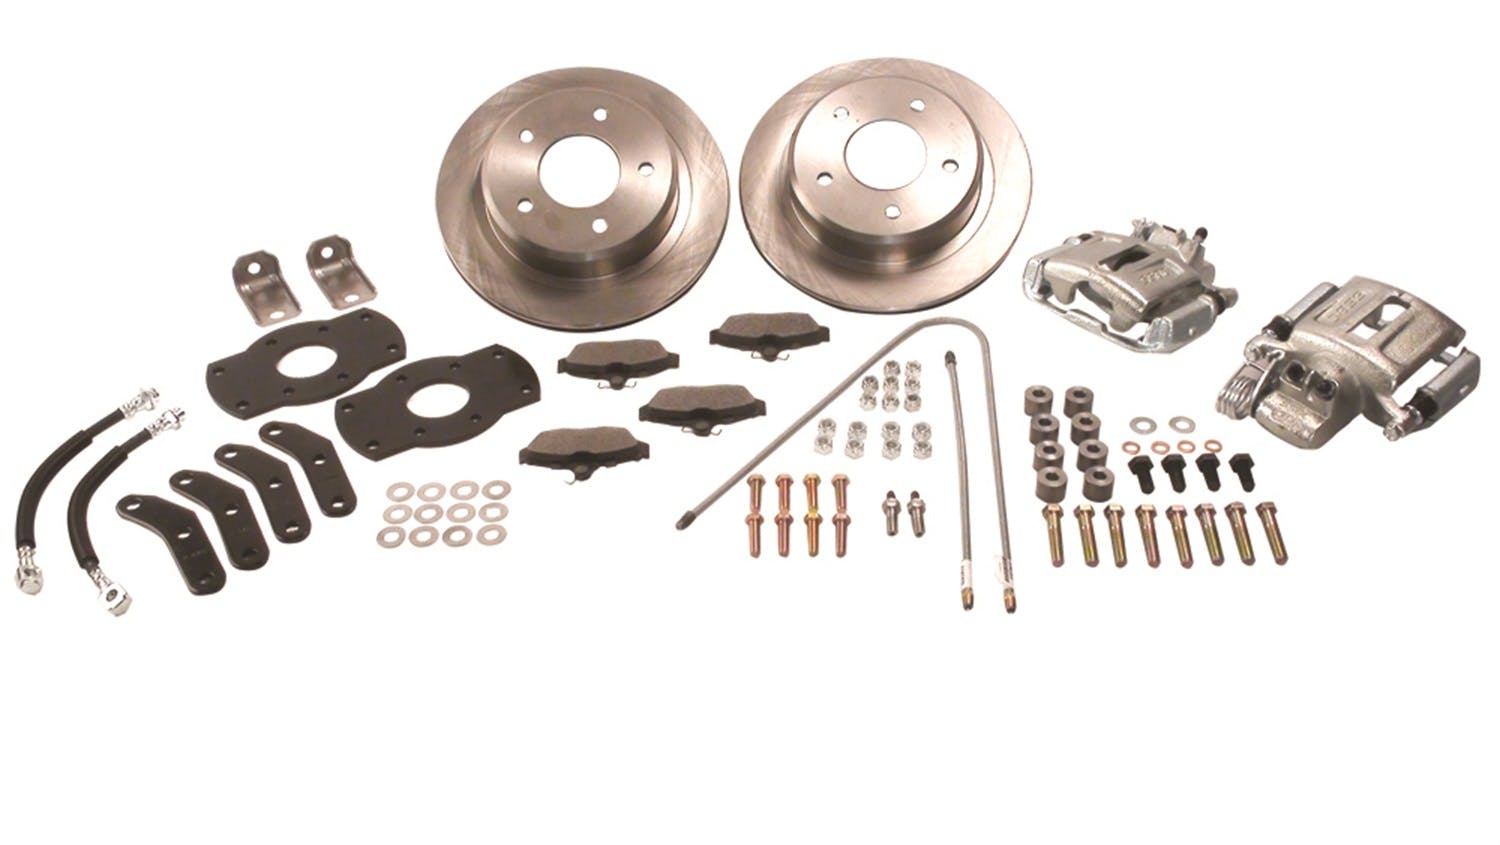 Stainless Steel Brakes A130-2R Kit A130-2 w/red calipers